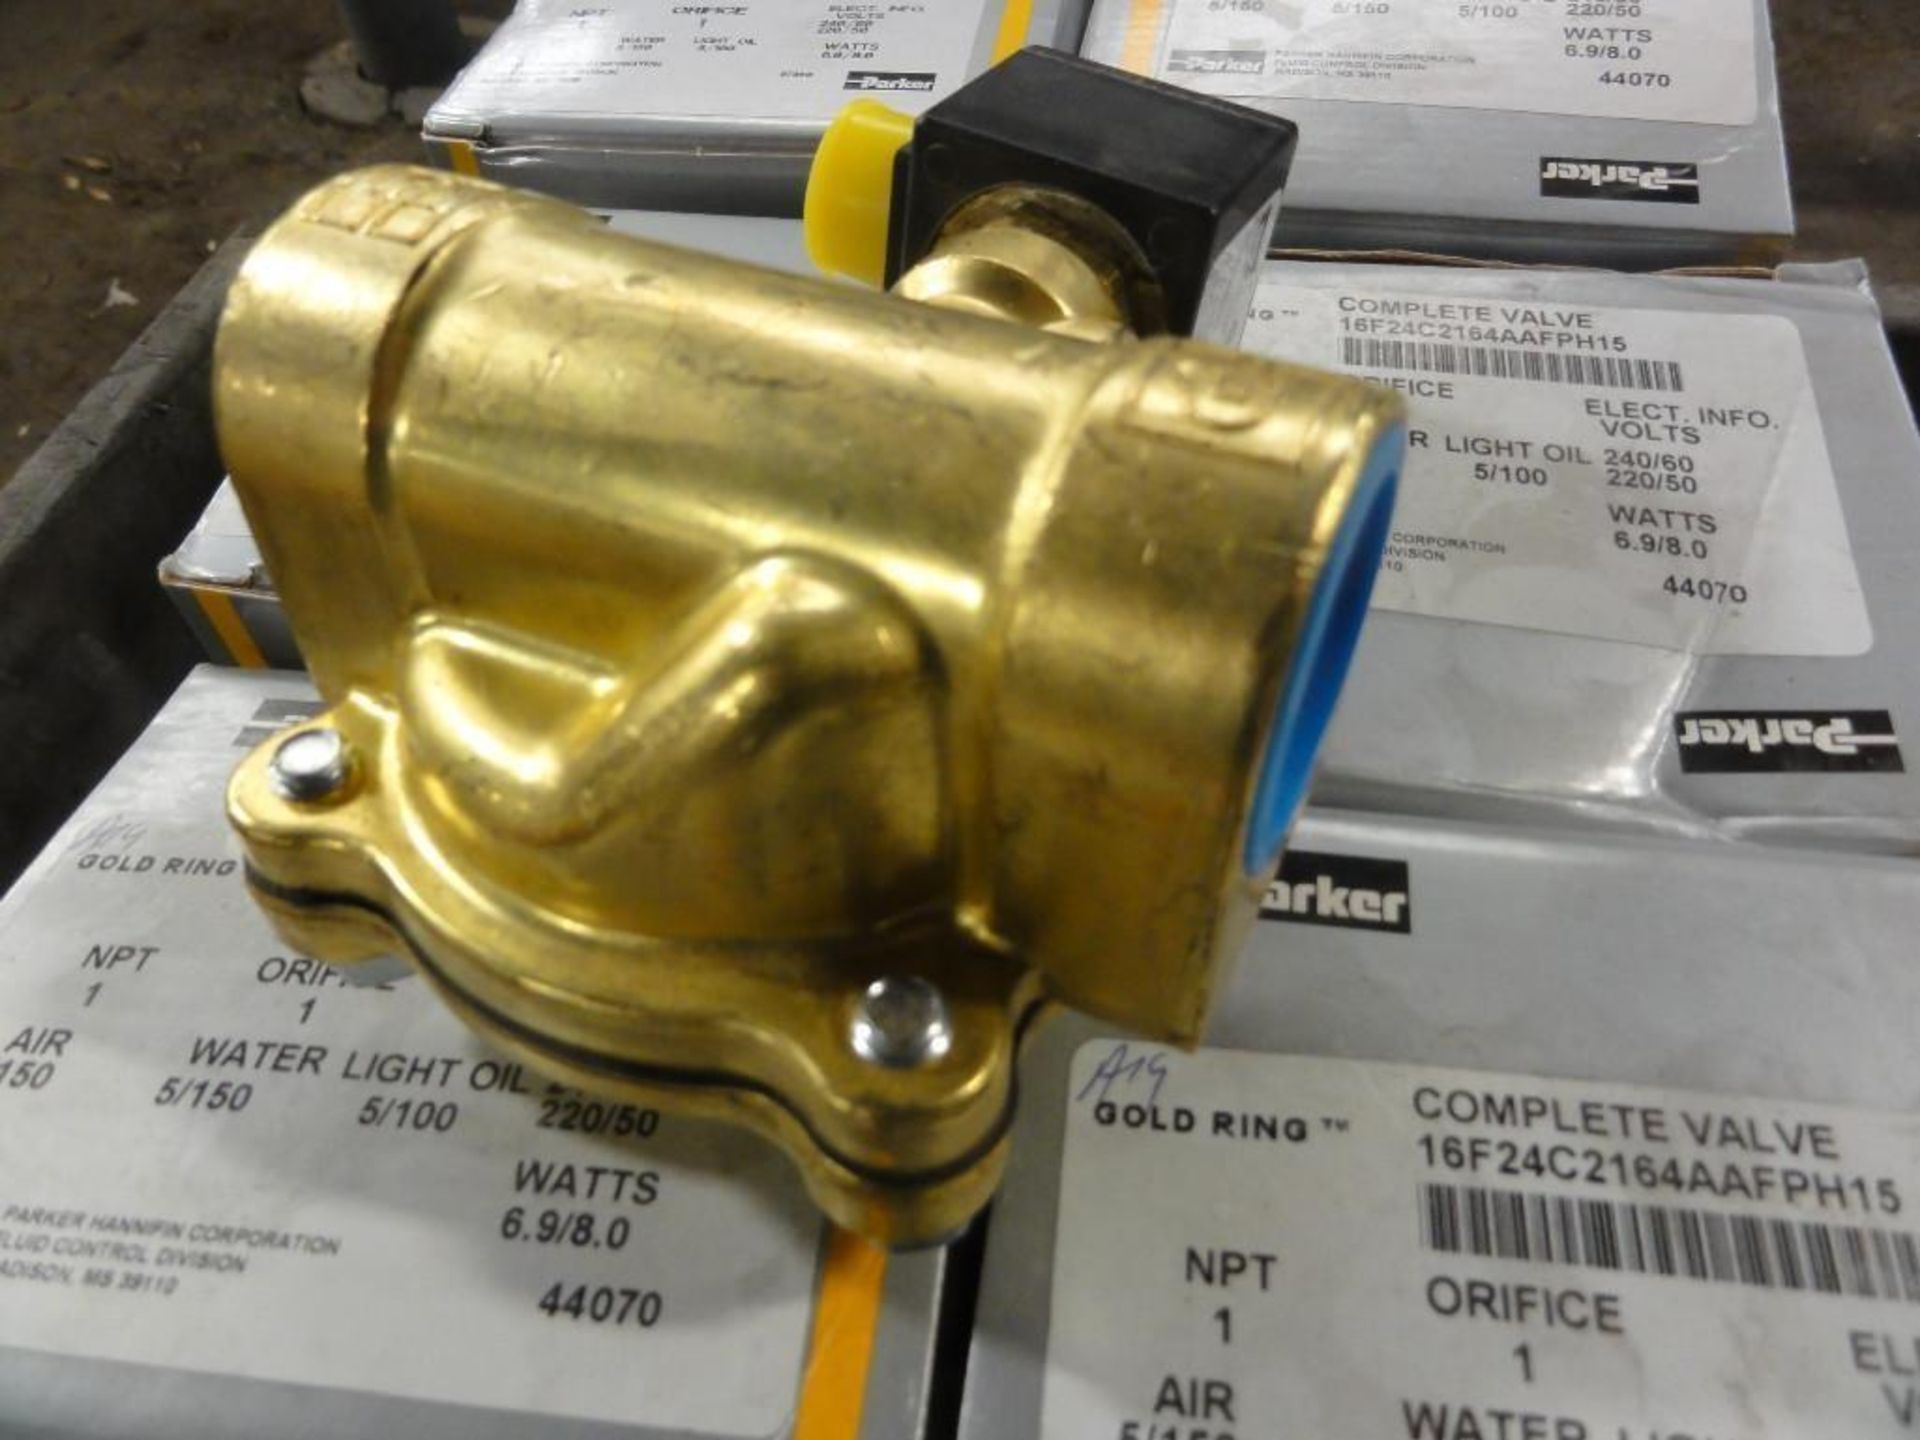 (8) NEW, Parker Complete Valves, Model 16F24C2164AAFPH15, NPT: 1, Oriface: 1, Air: 5/150, Water: 5/ - Image 3 of 6